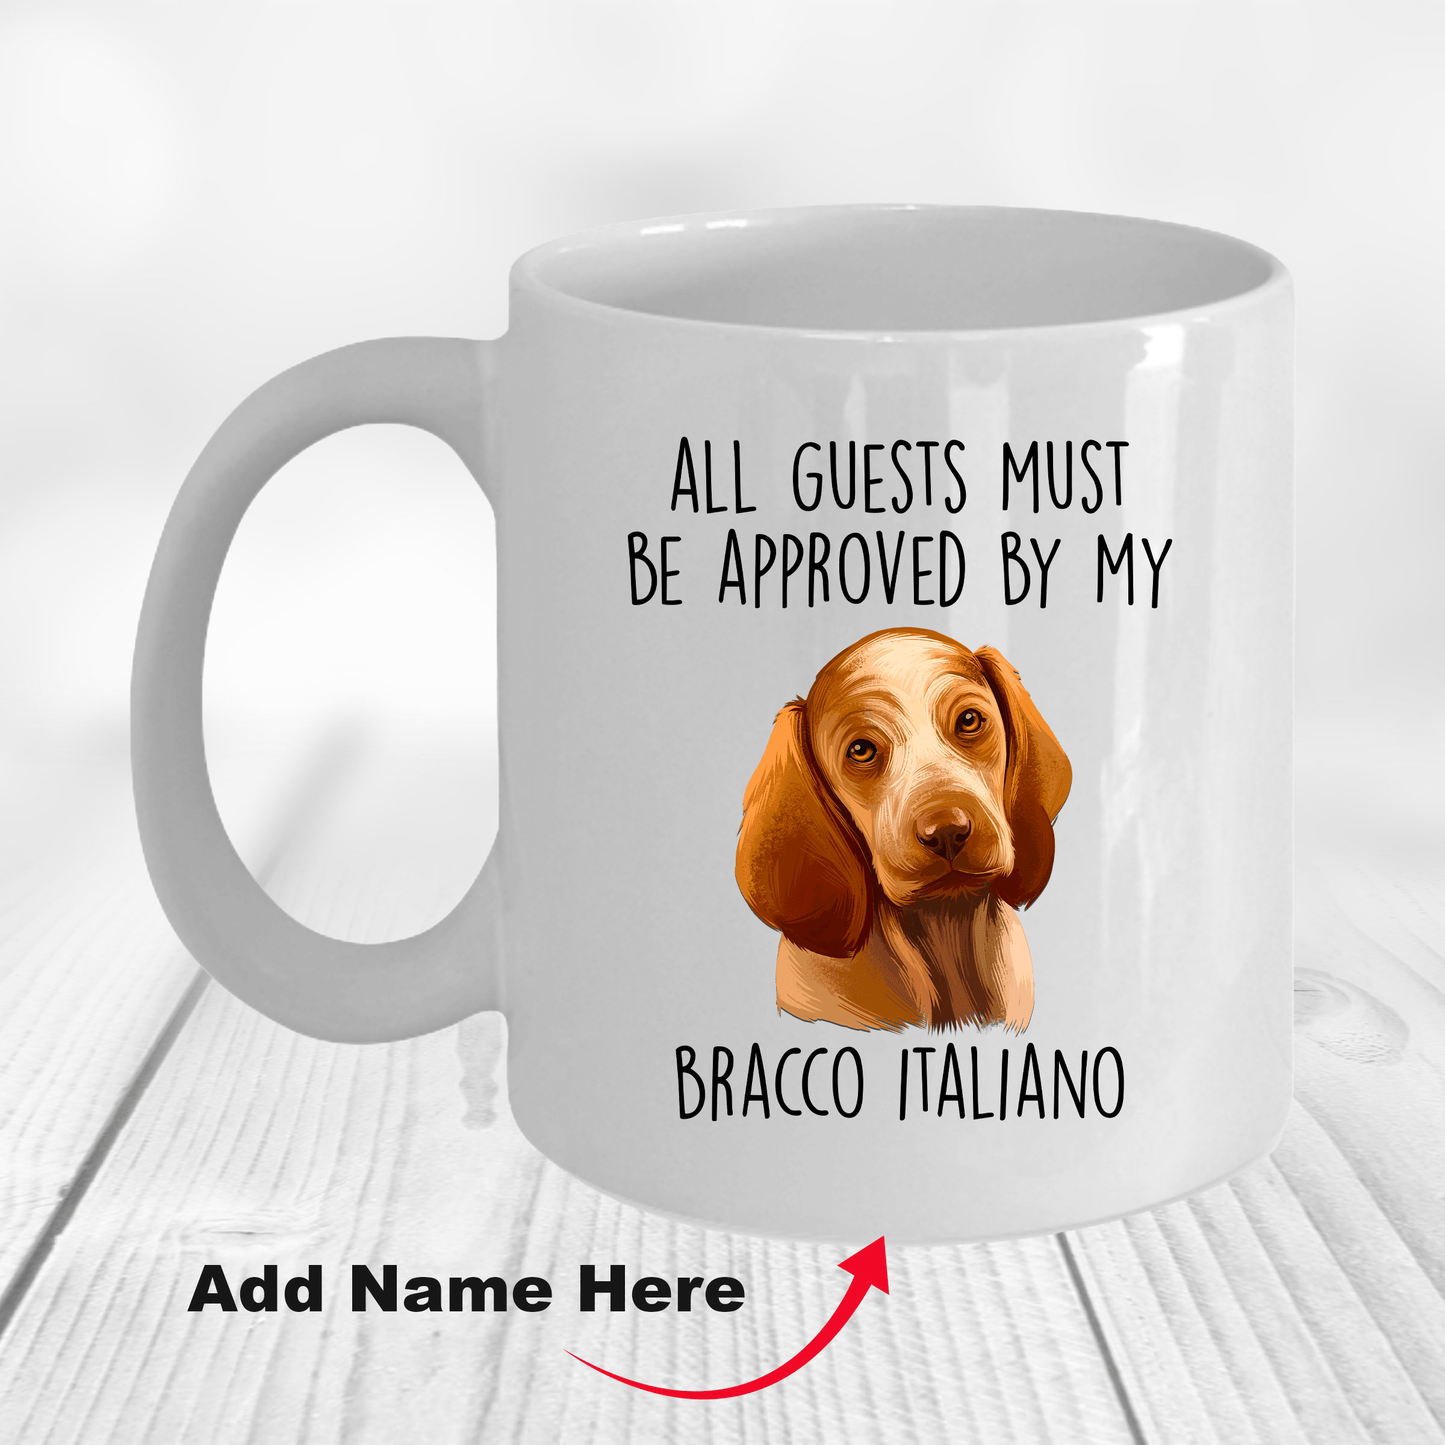 Bracco Italiano - All Guests Must be Approved - Funny Dog Ceramic Coffee Mug